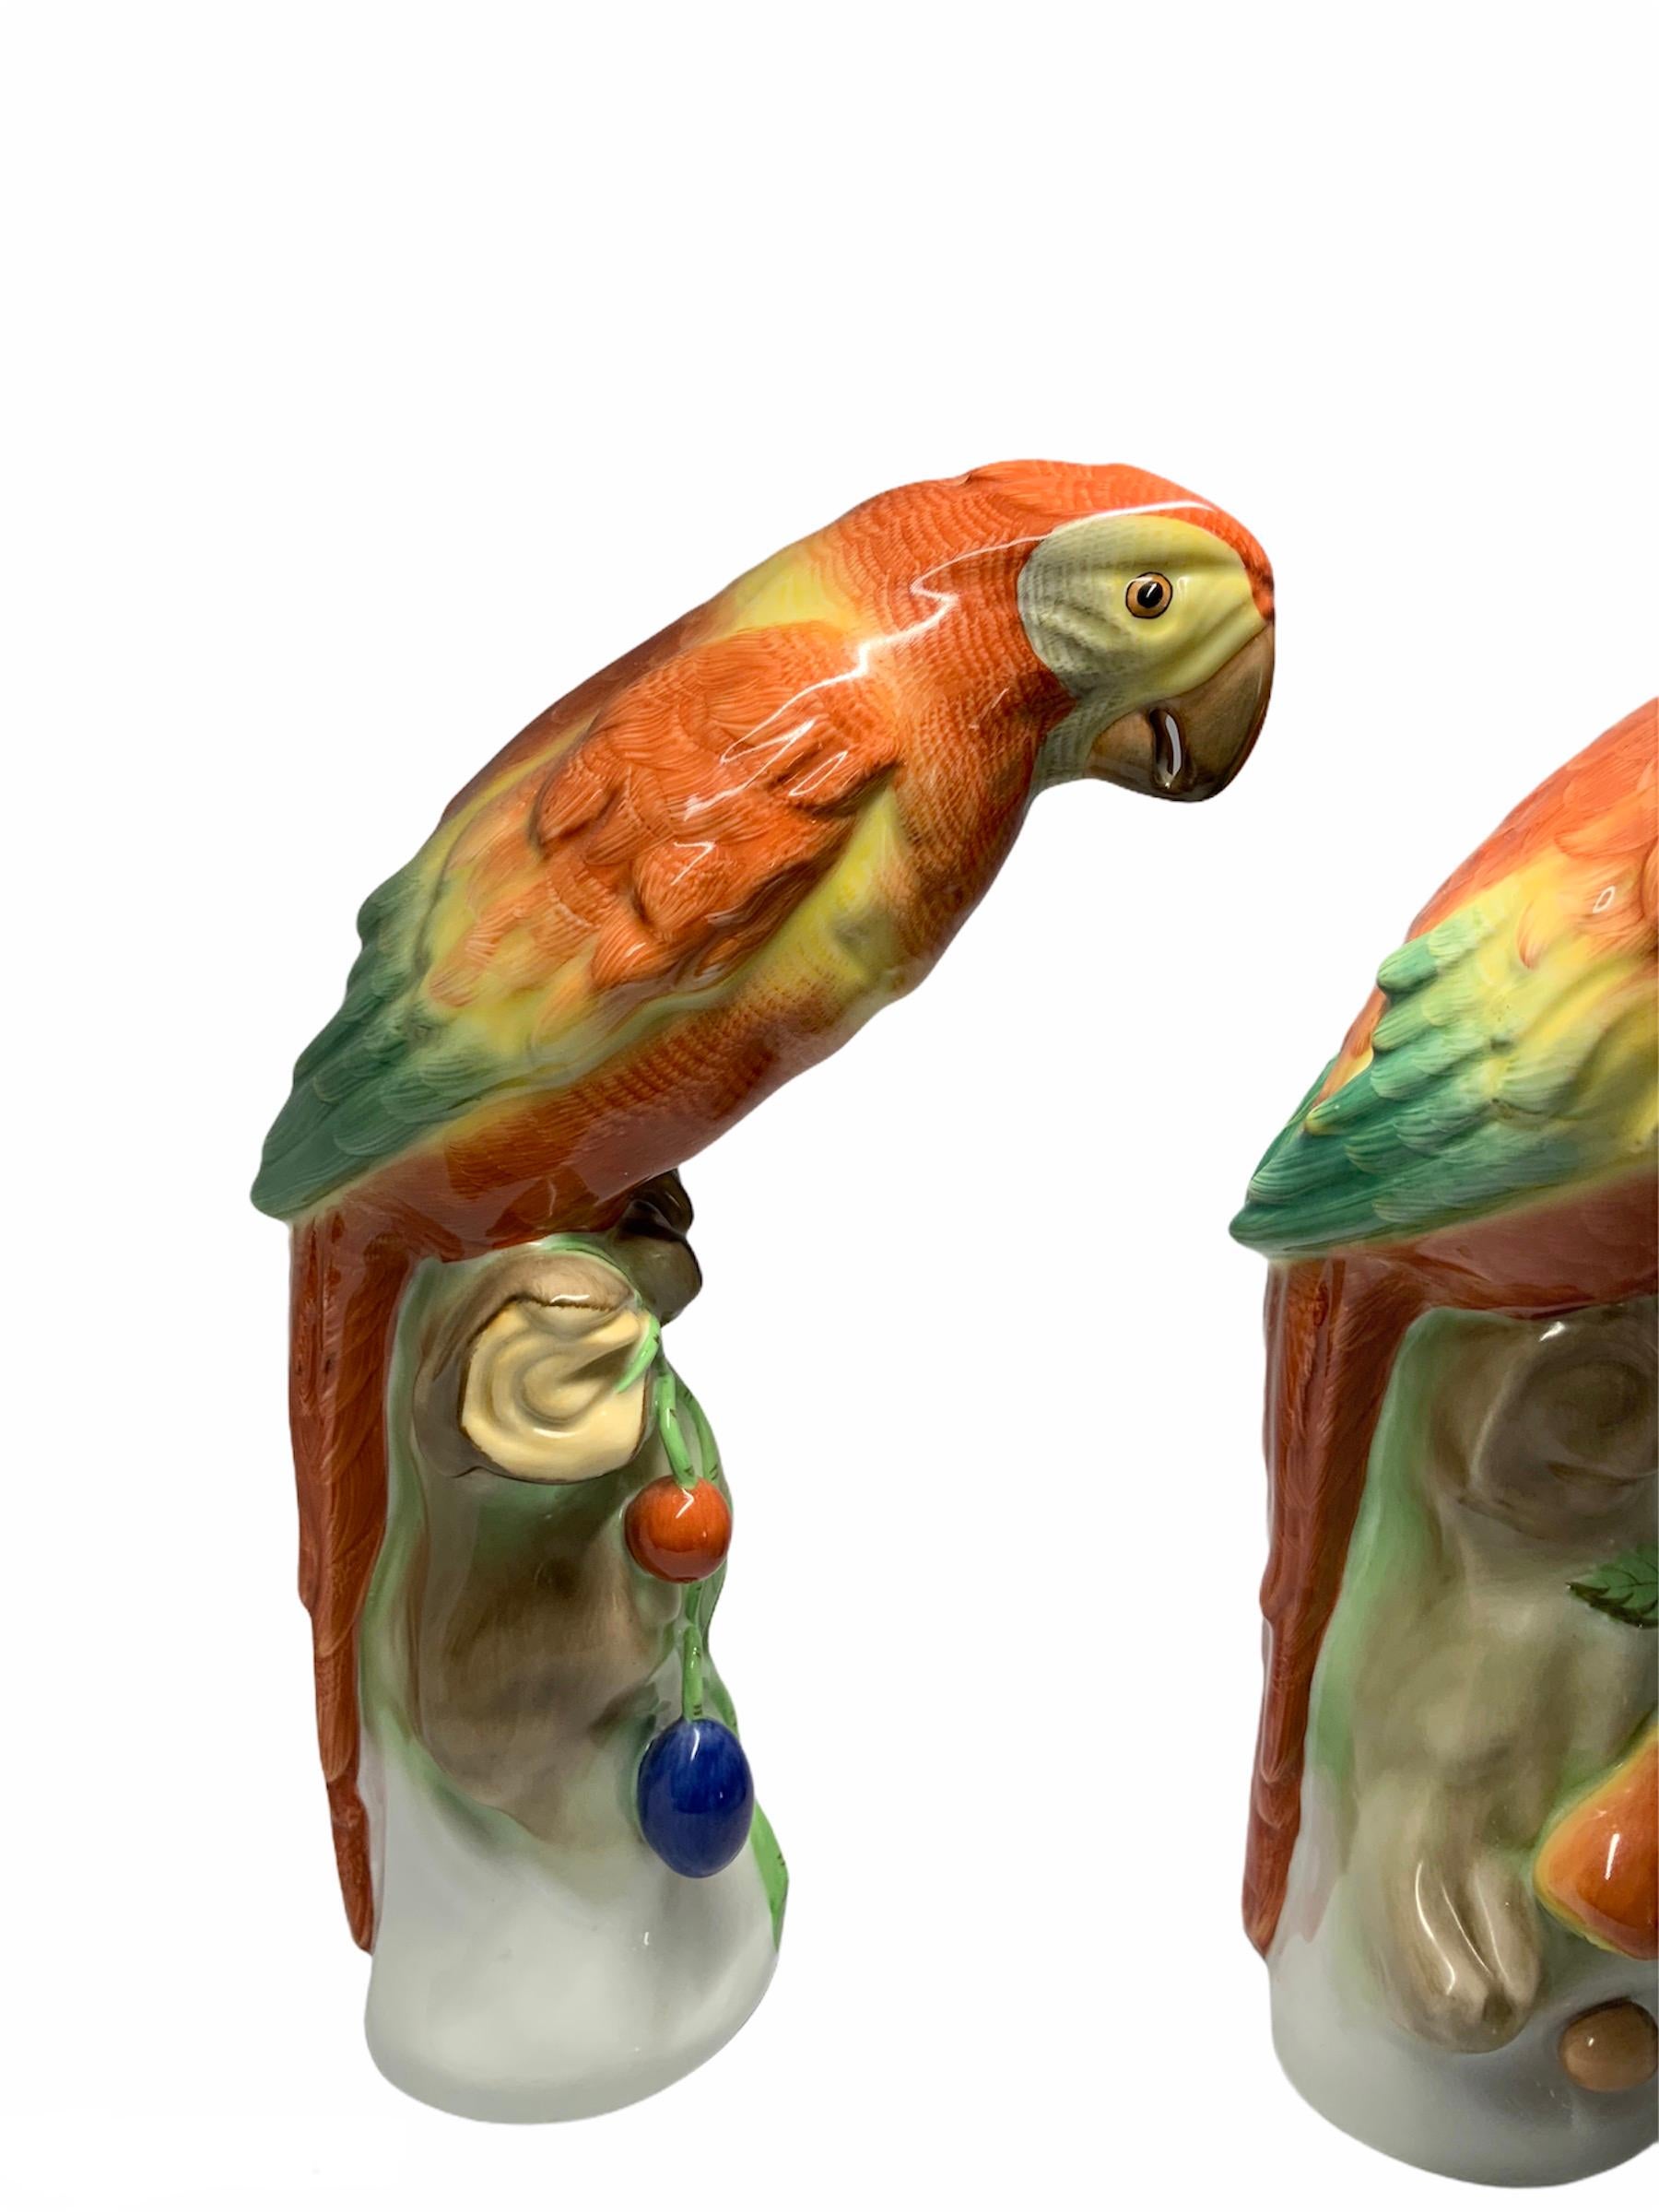 Hungarian Herend Porcelain Pair of Parrots Figurines